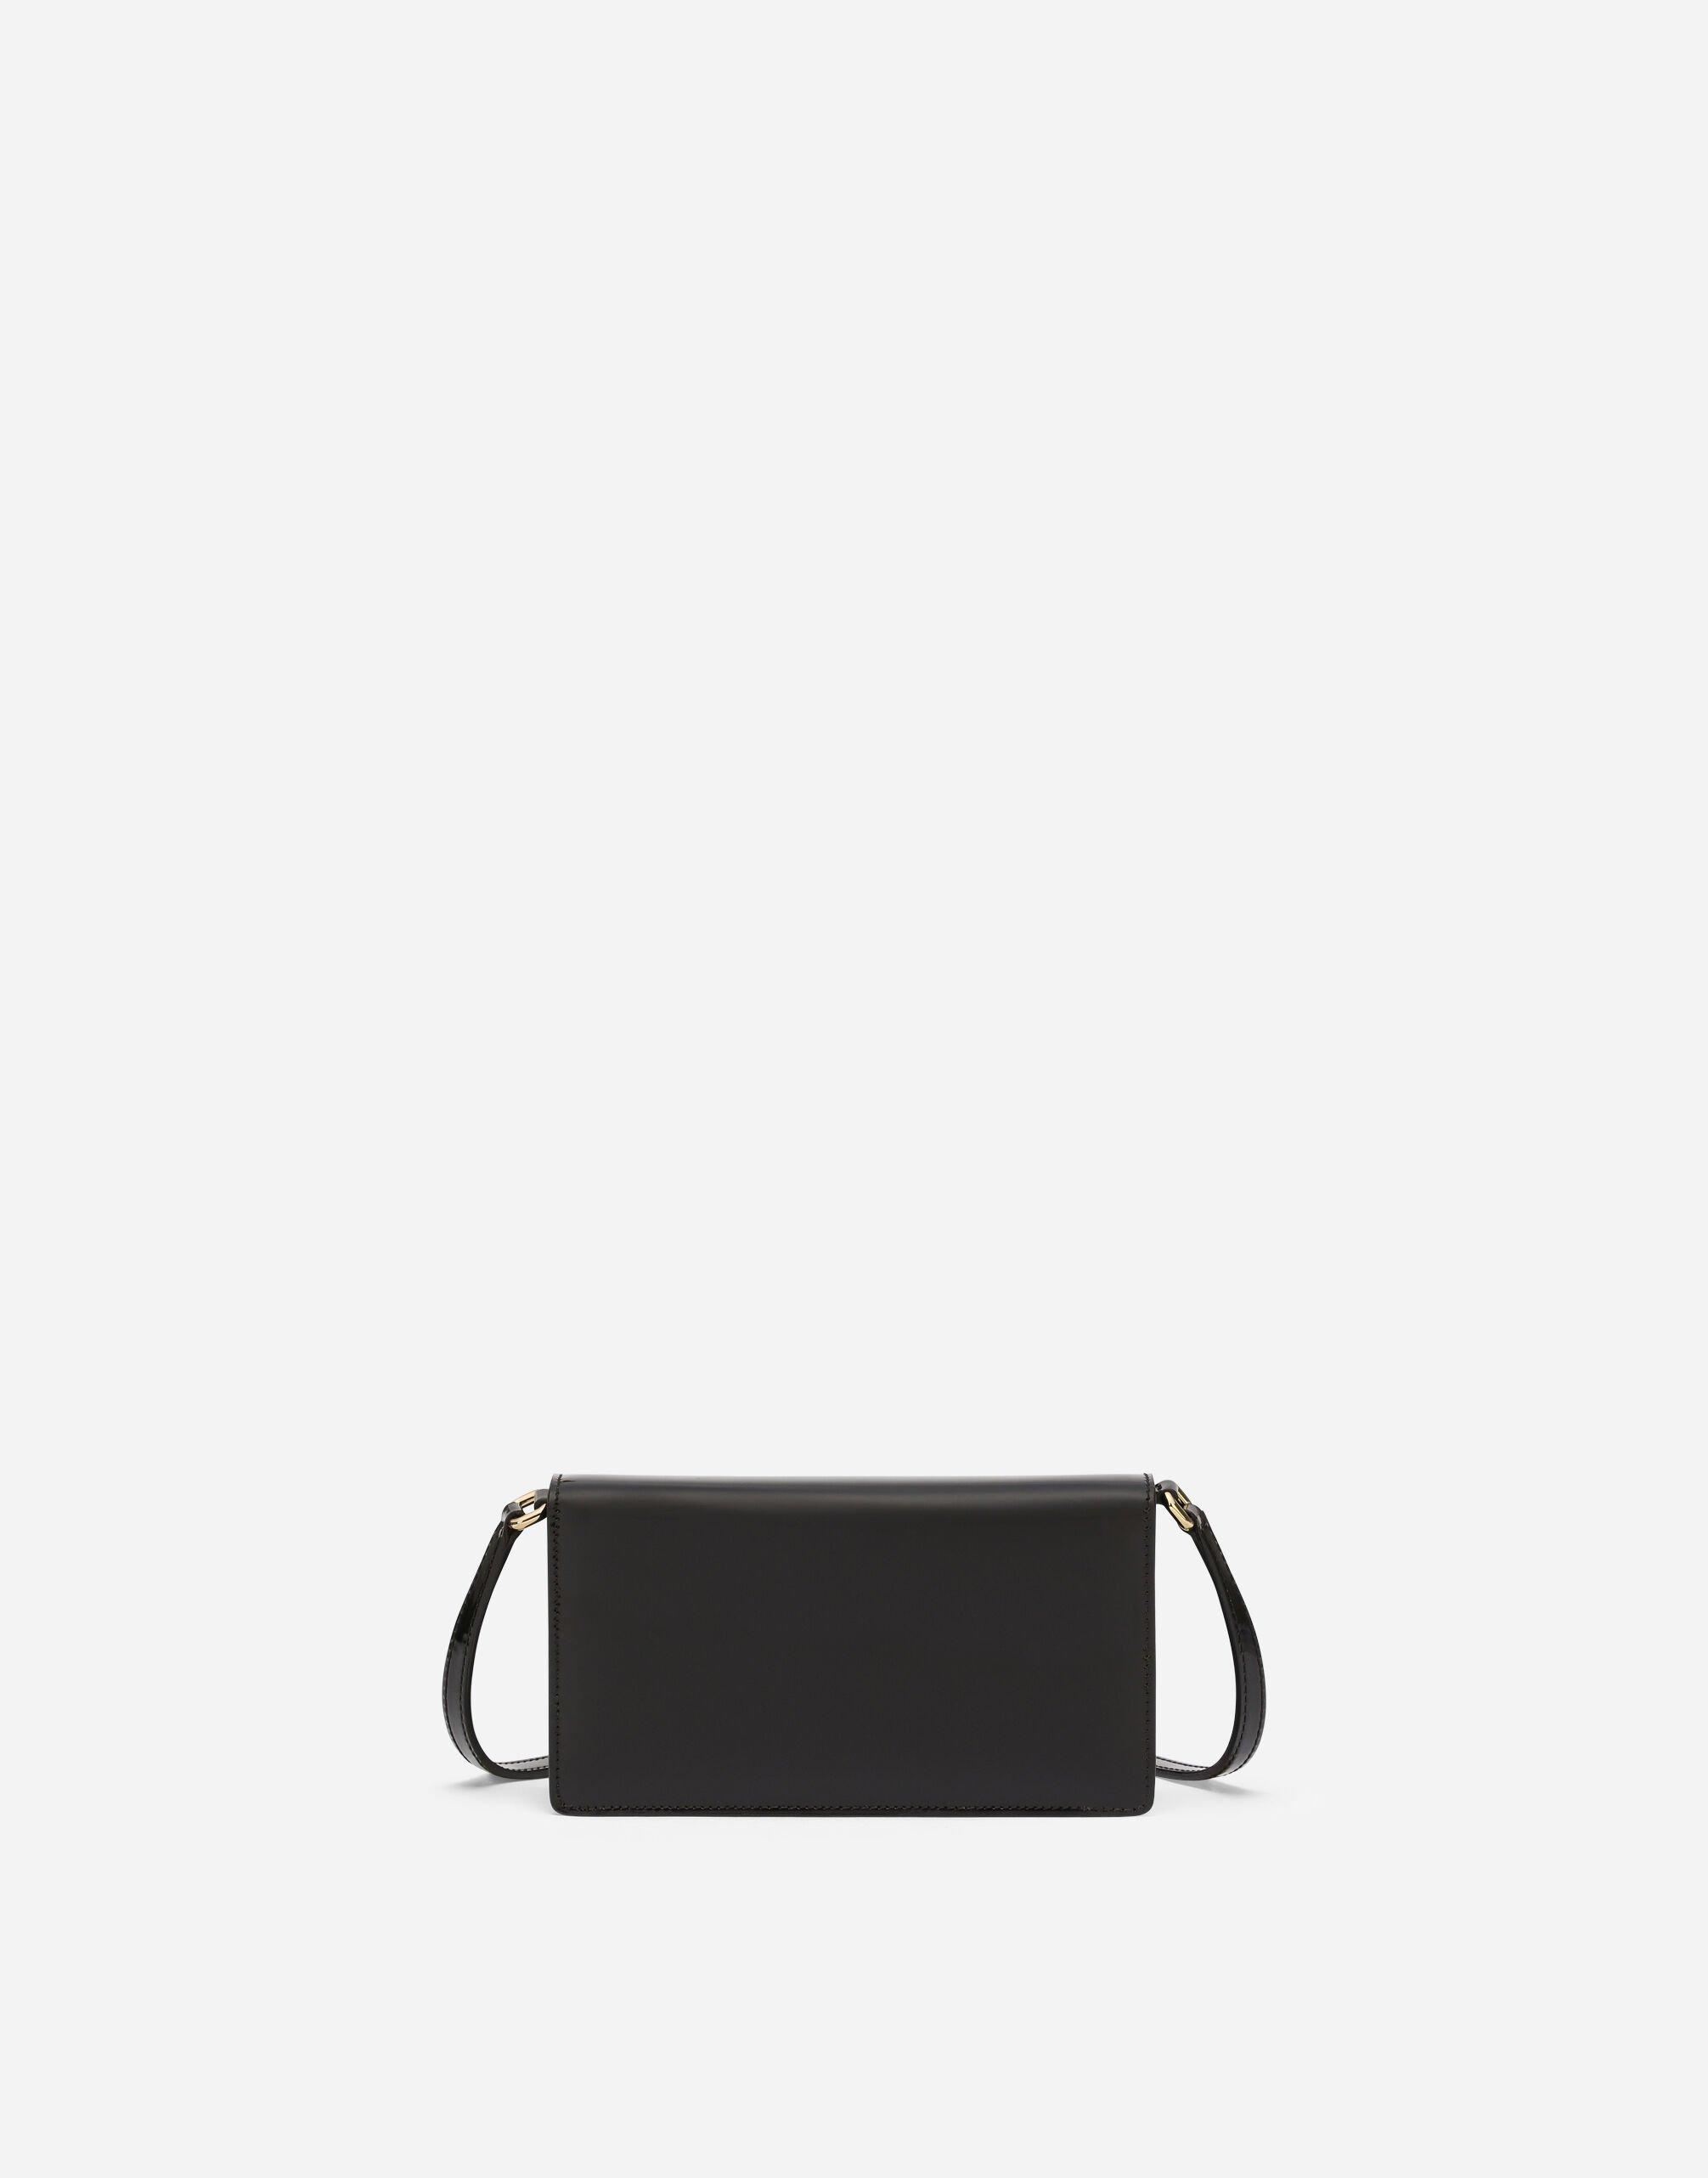 Dolce & Gabbana Phone Bag With Branded Maxi-plate in Black | Lyst